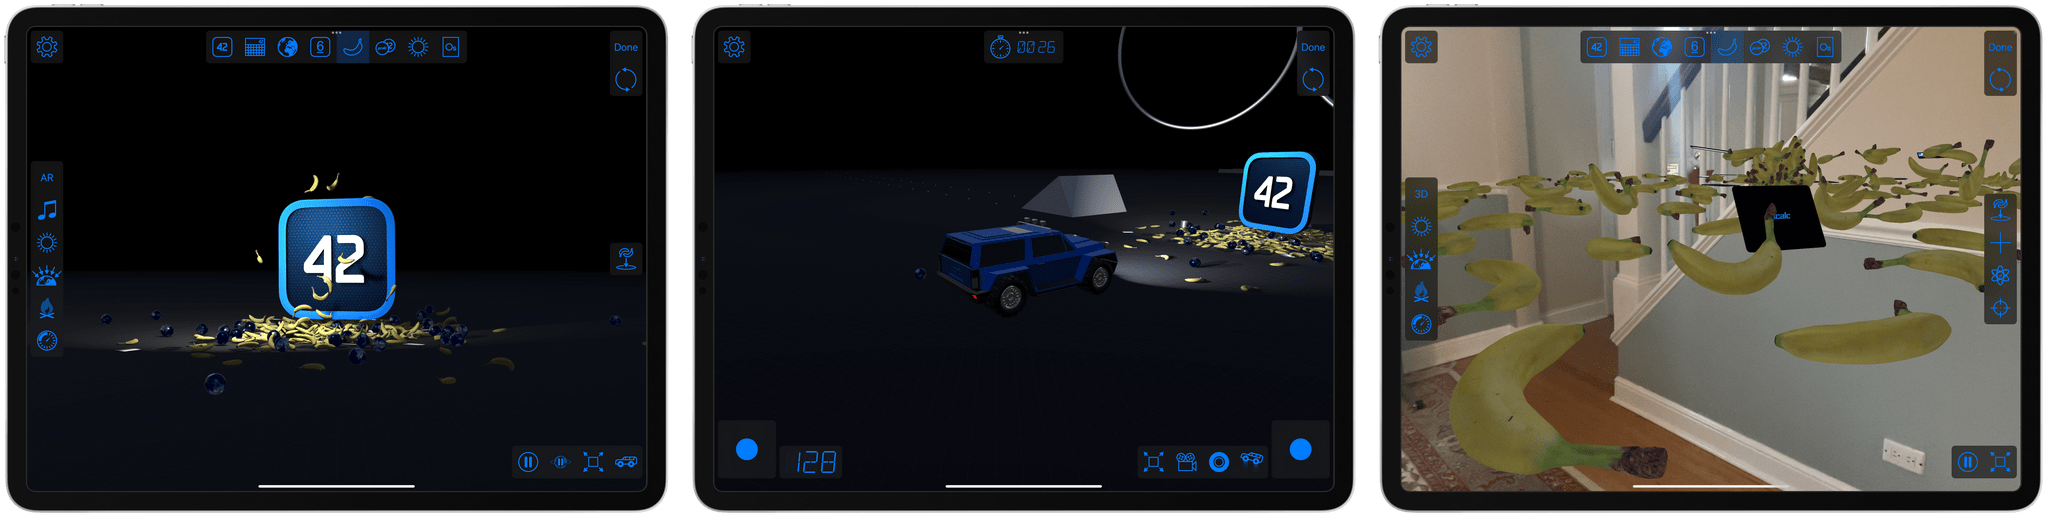 PCalc's About screen can render 3D objects and includes a car racing game and AR mode.